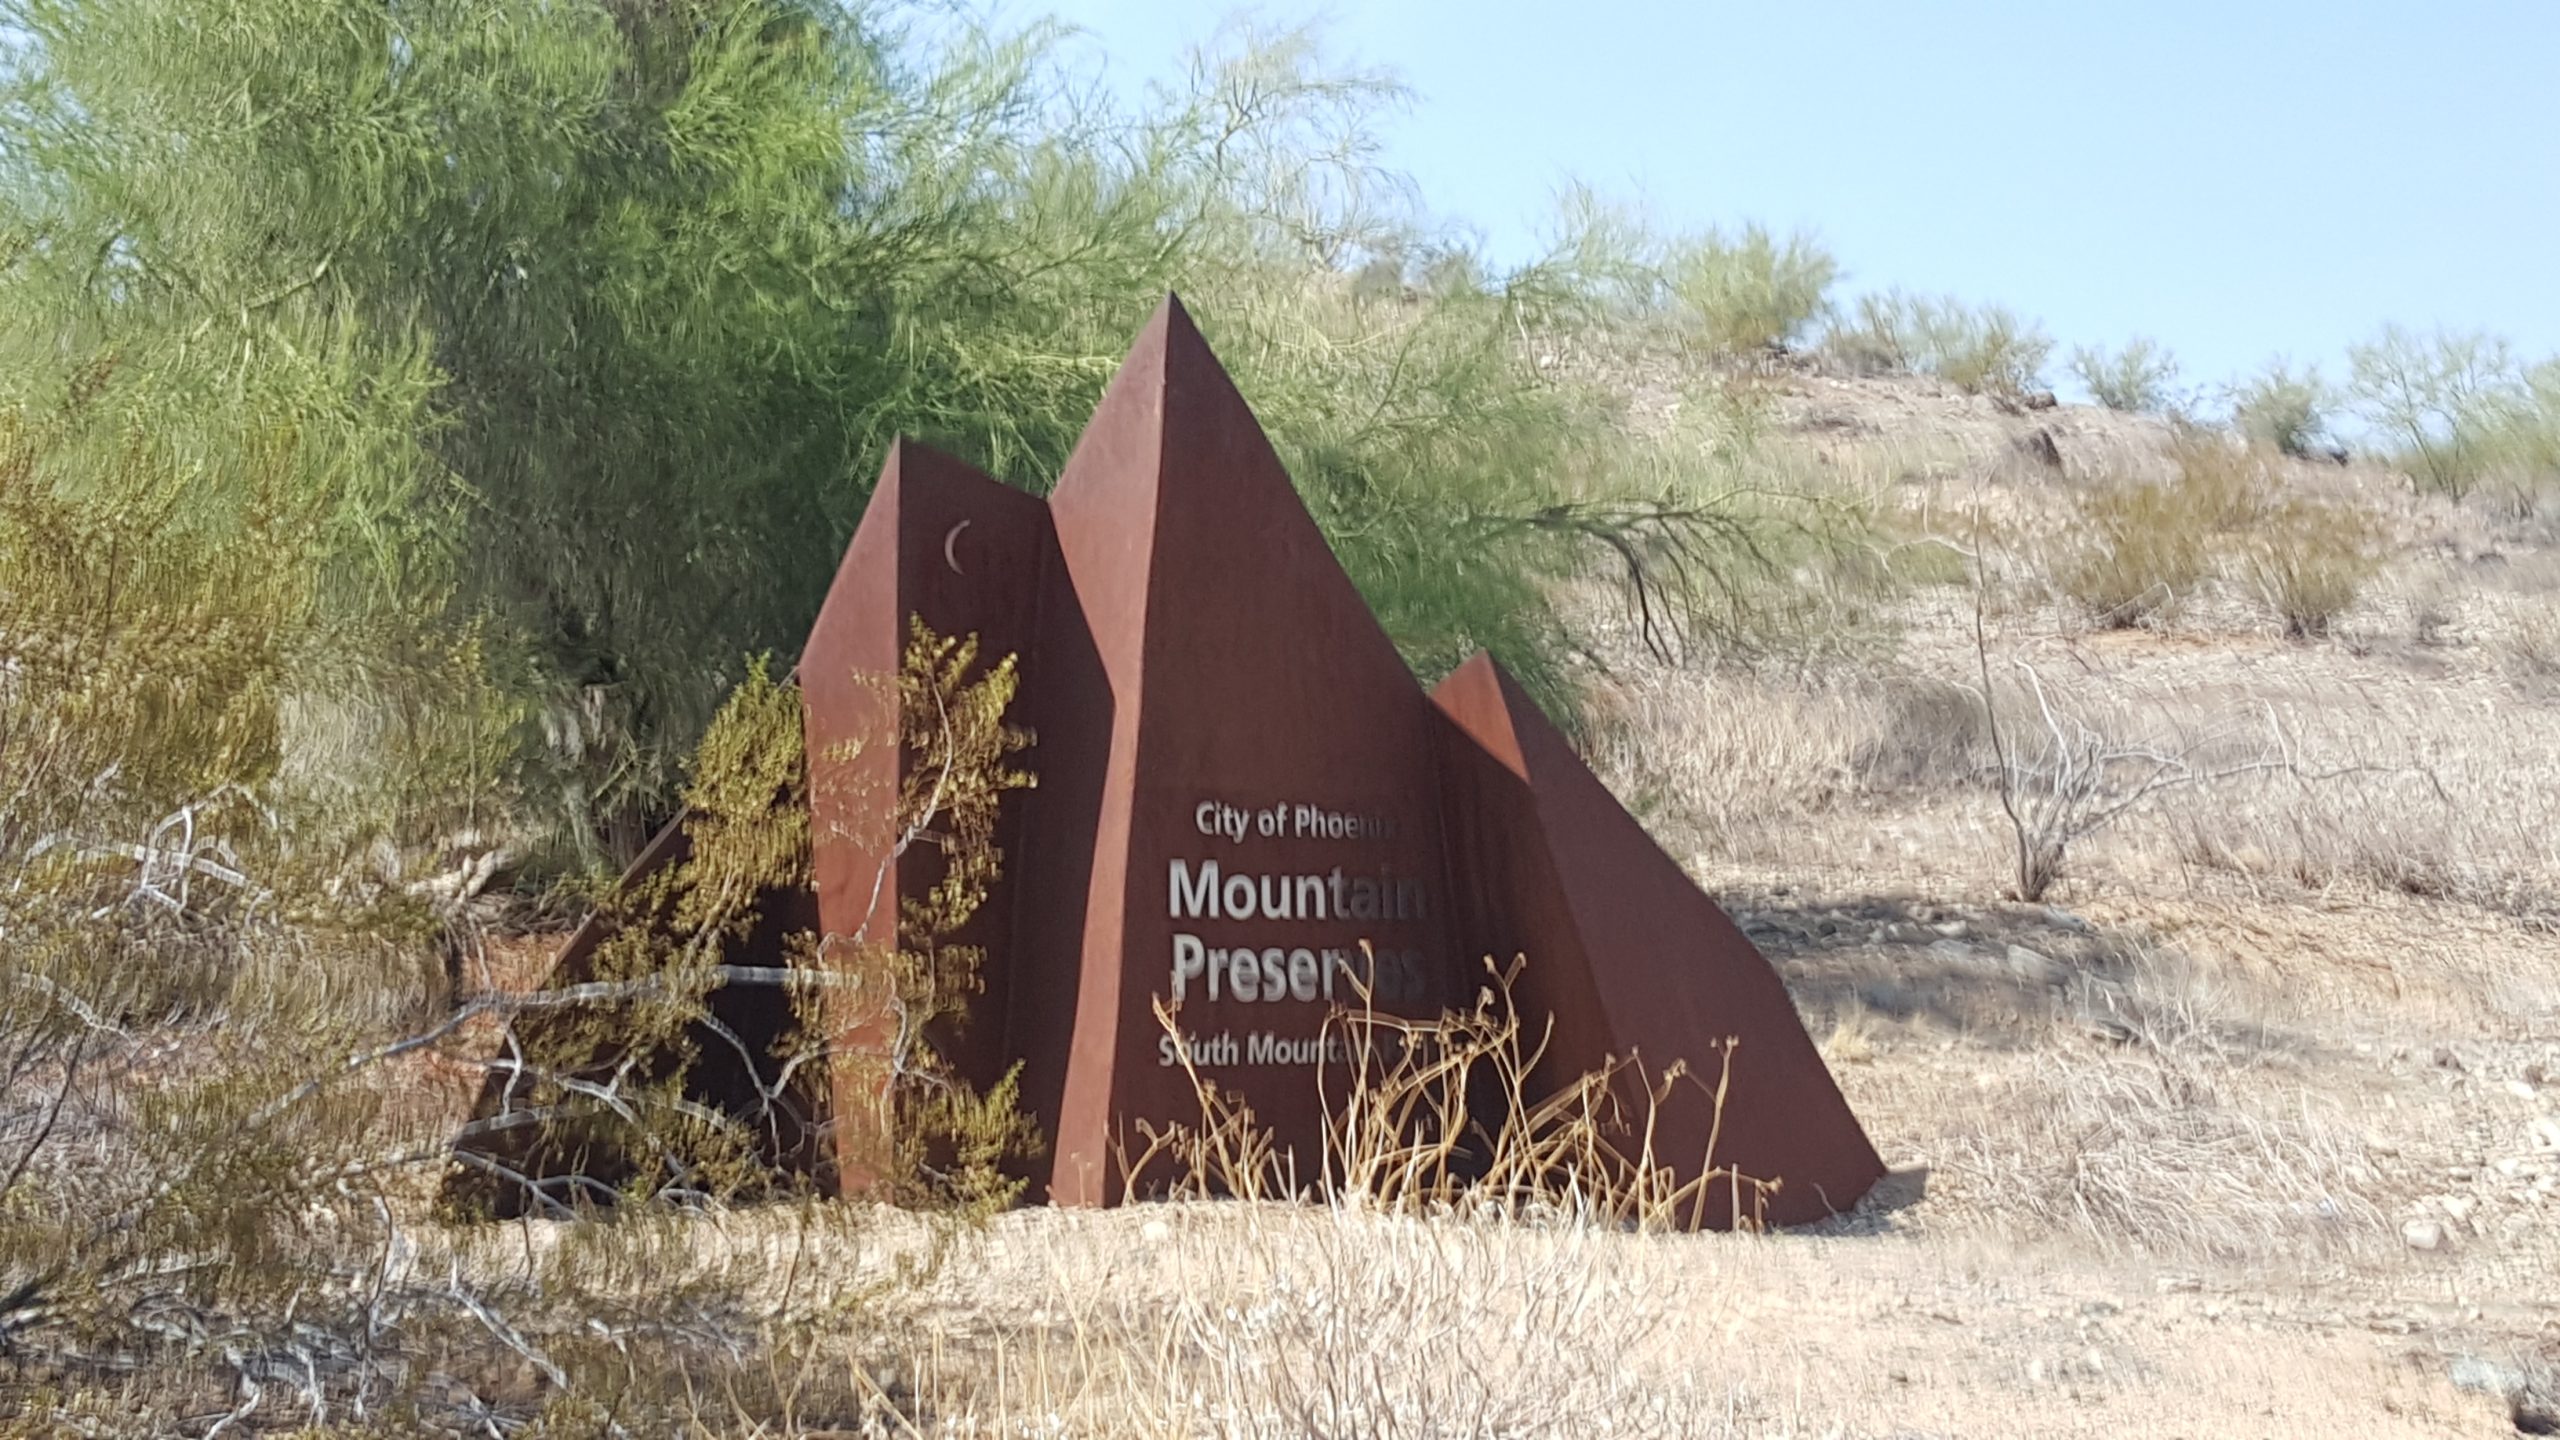 South Mountain Park and Preserve, Phoenix